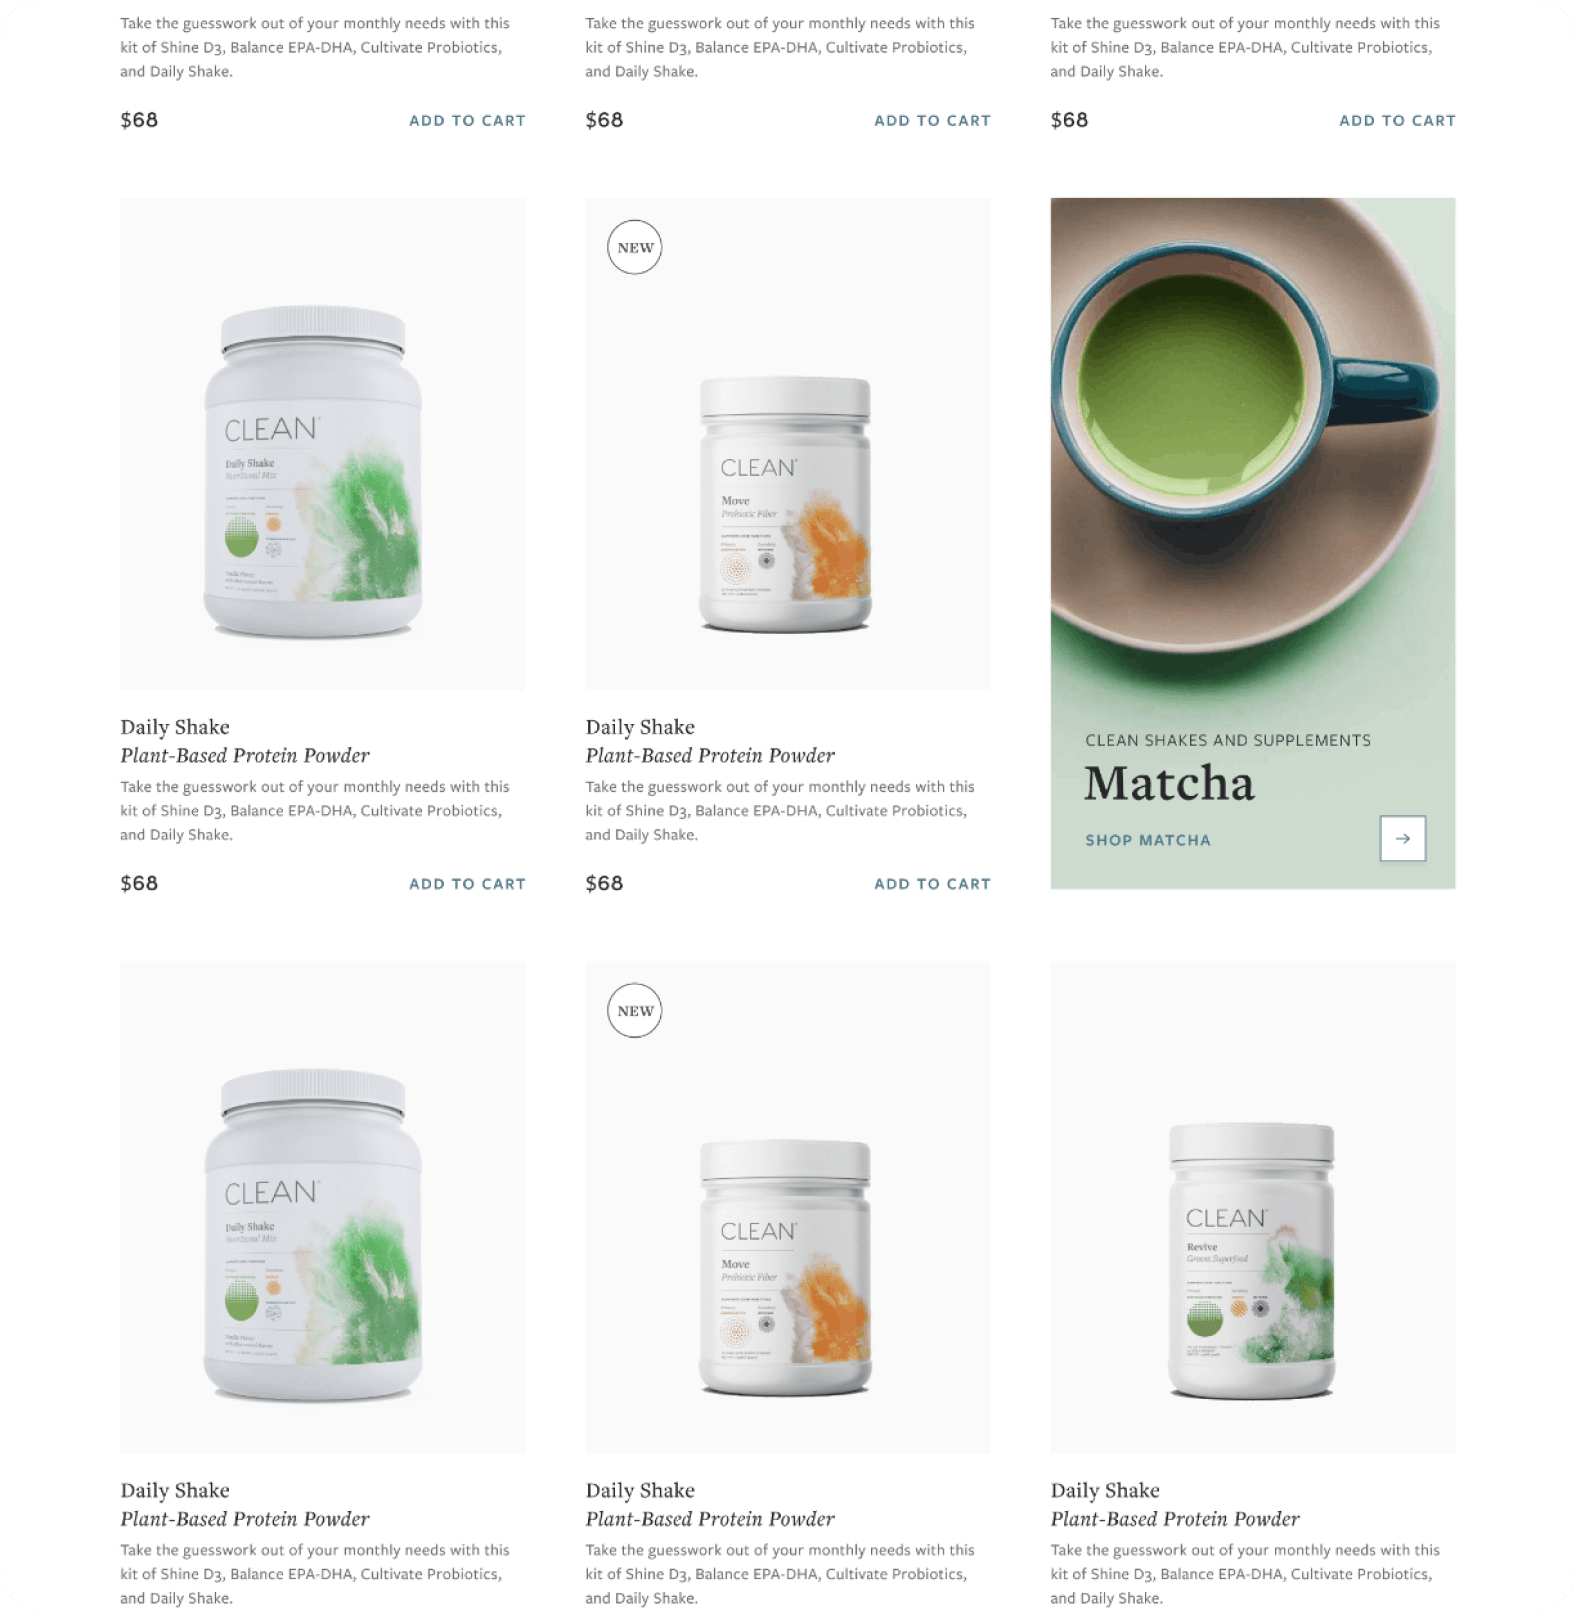 A product listing page on Clean's website.